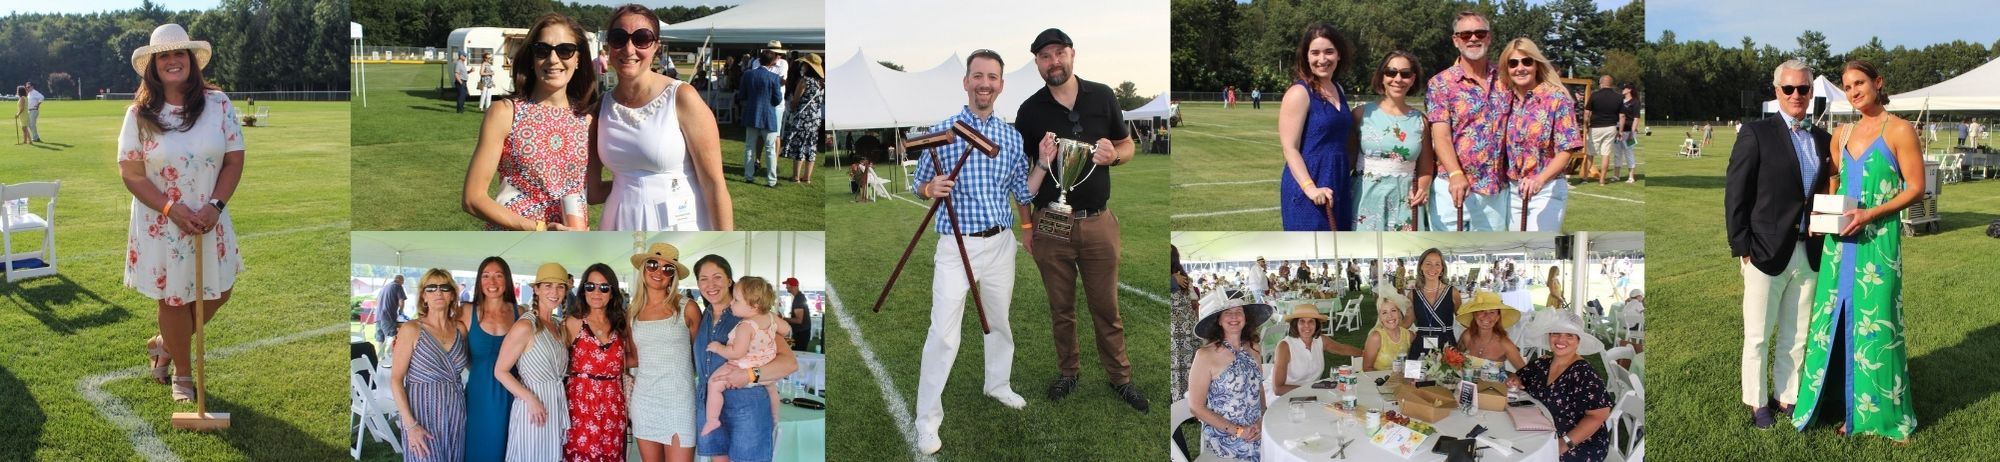 collage of people at an outdoor croquet event